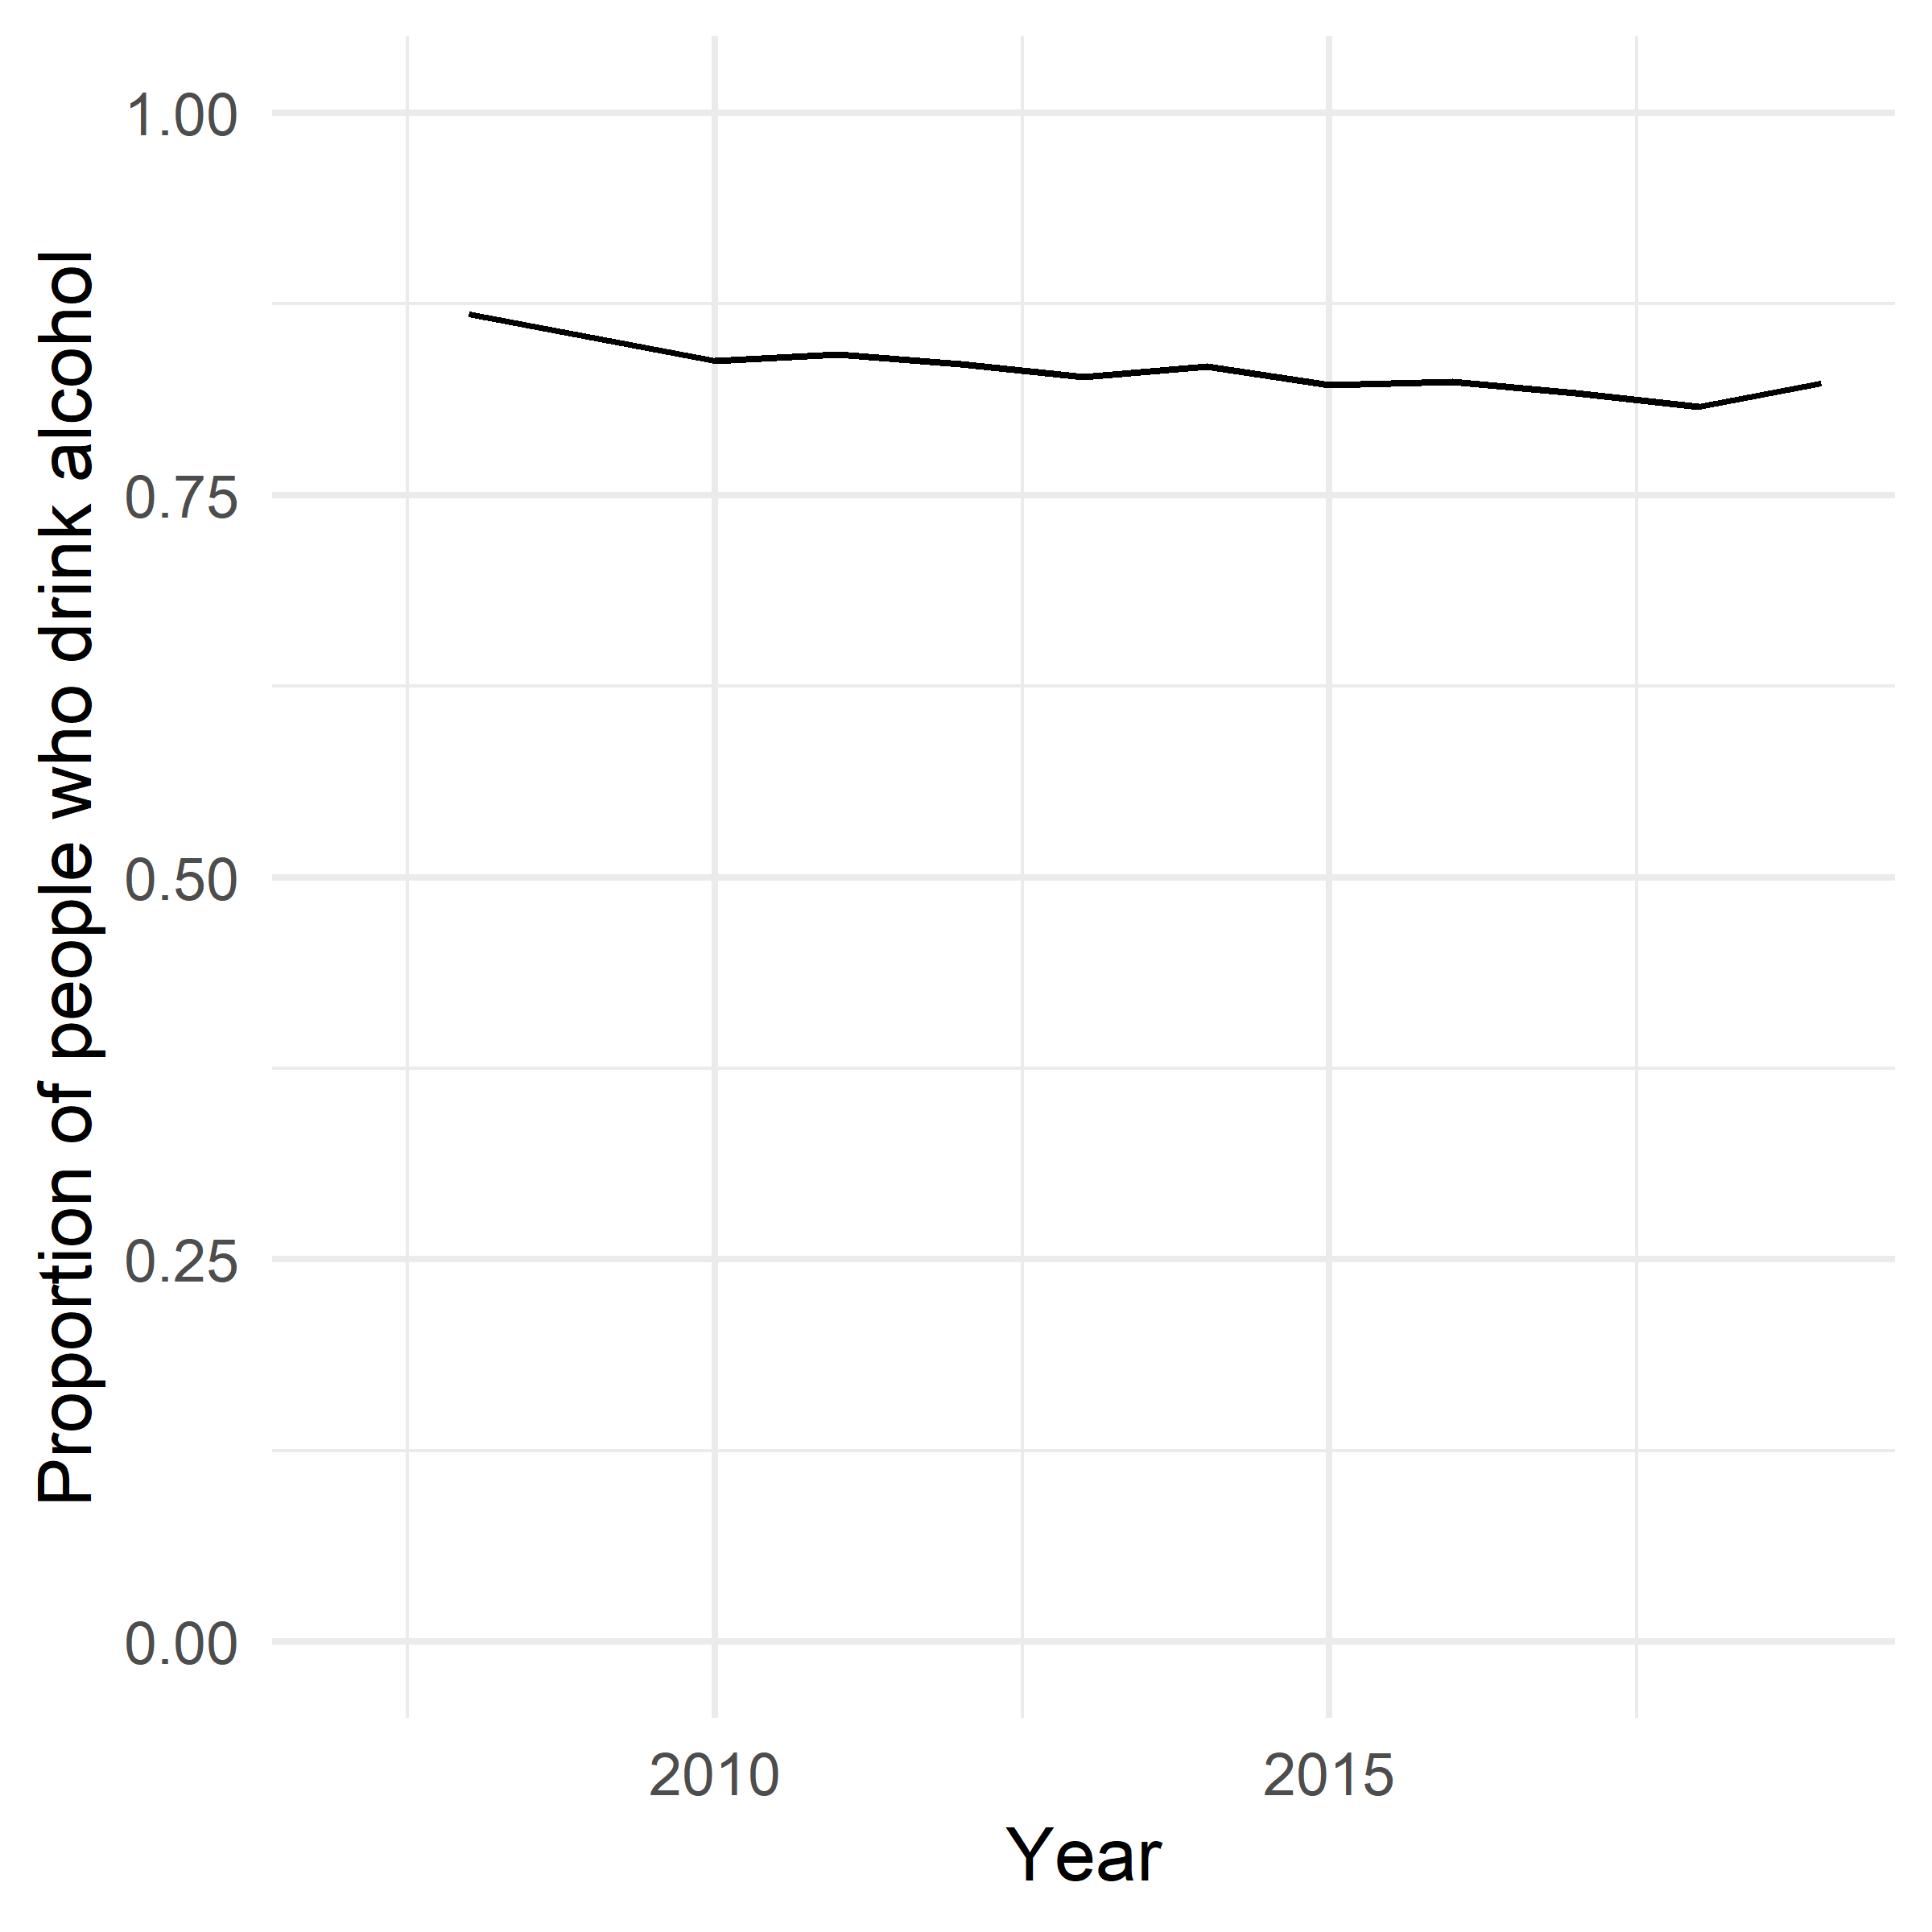 Figure 5. Proportion of people who drink alcohol.